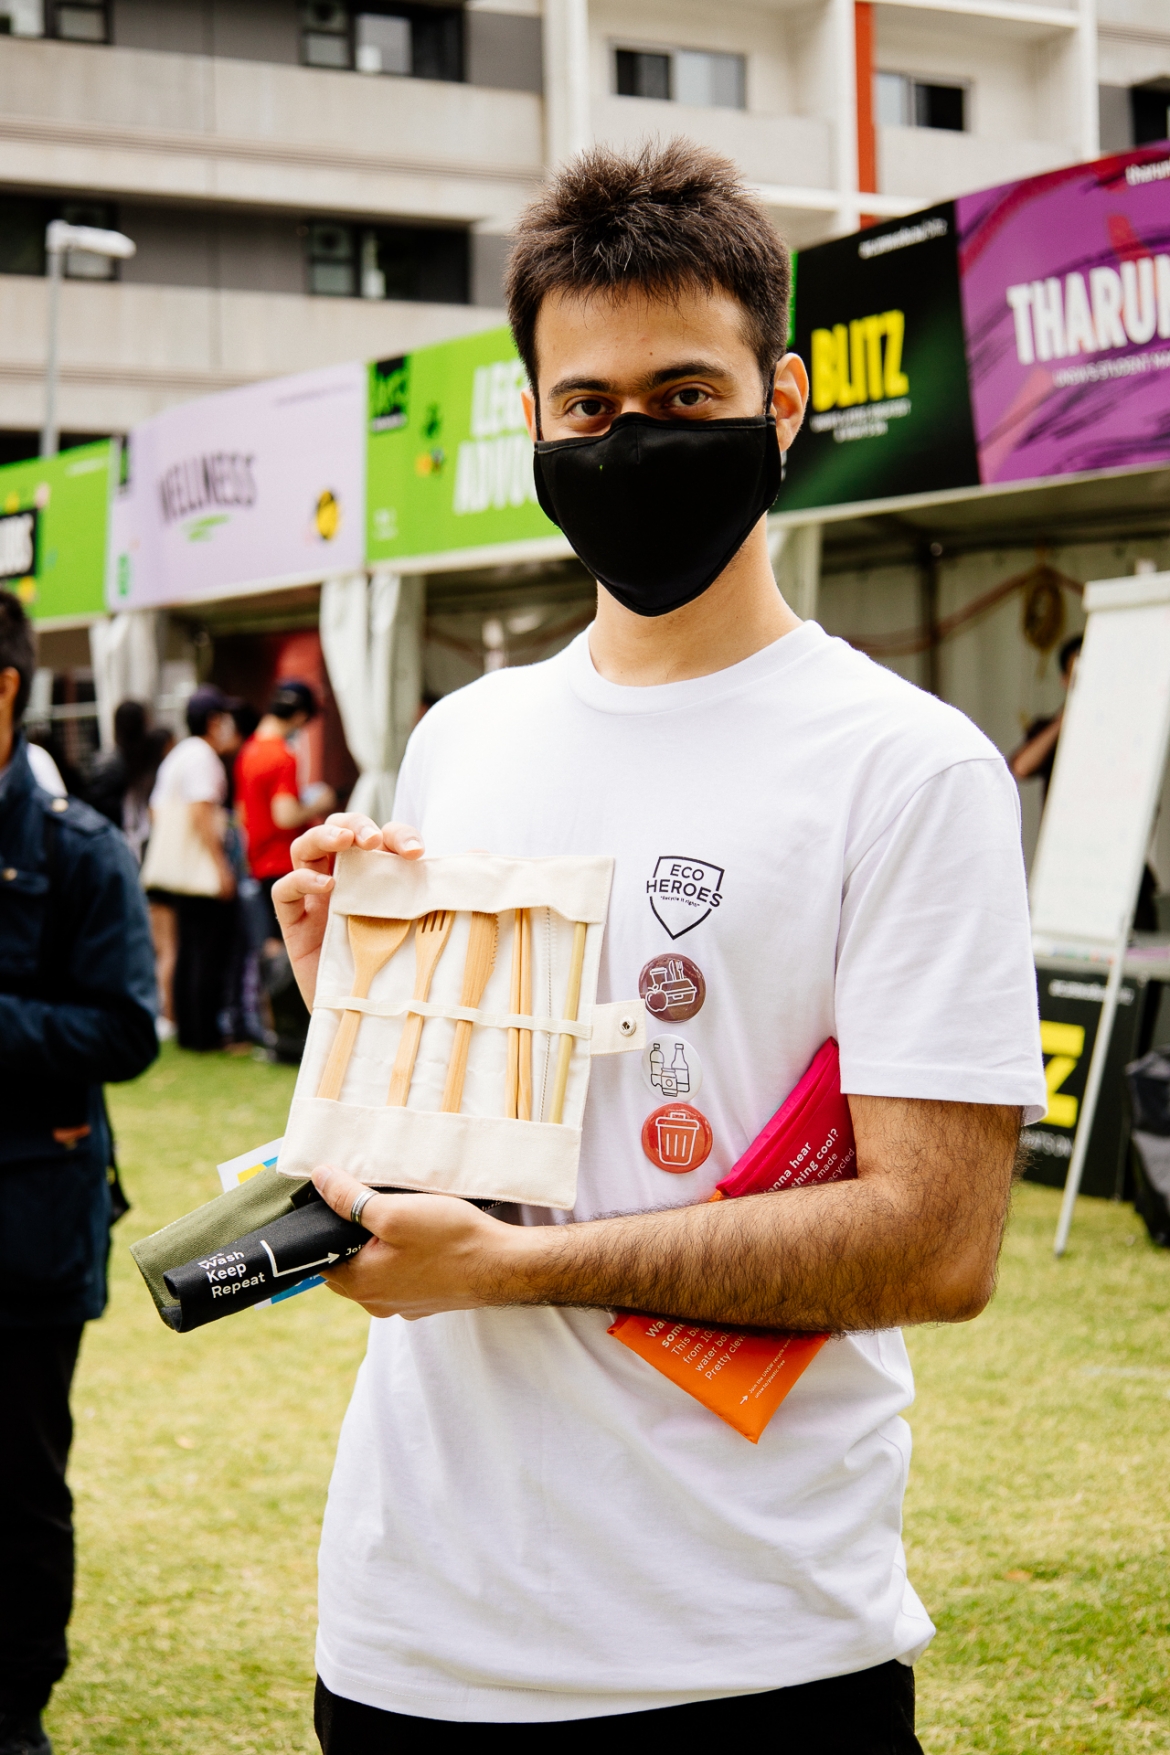 Photograph of student volunteer holding up UNSW Plastic Free reusable cutlery